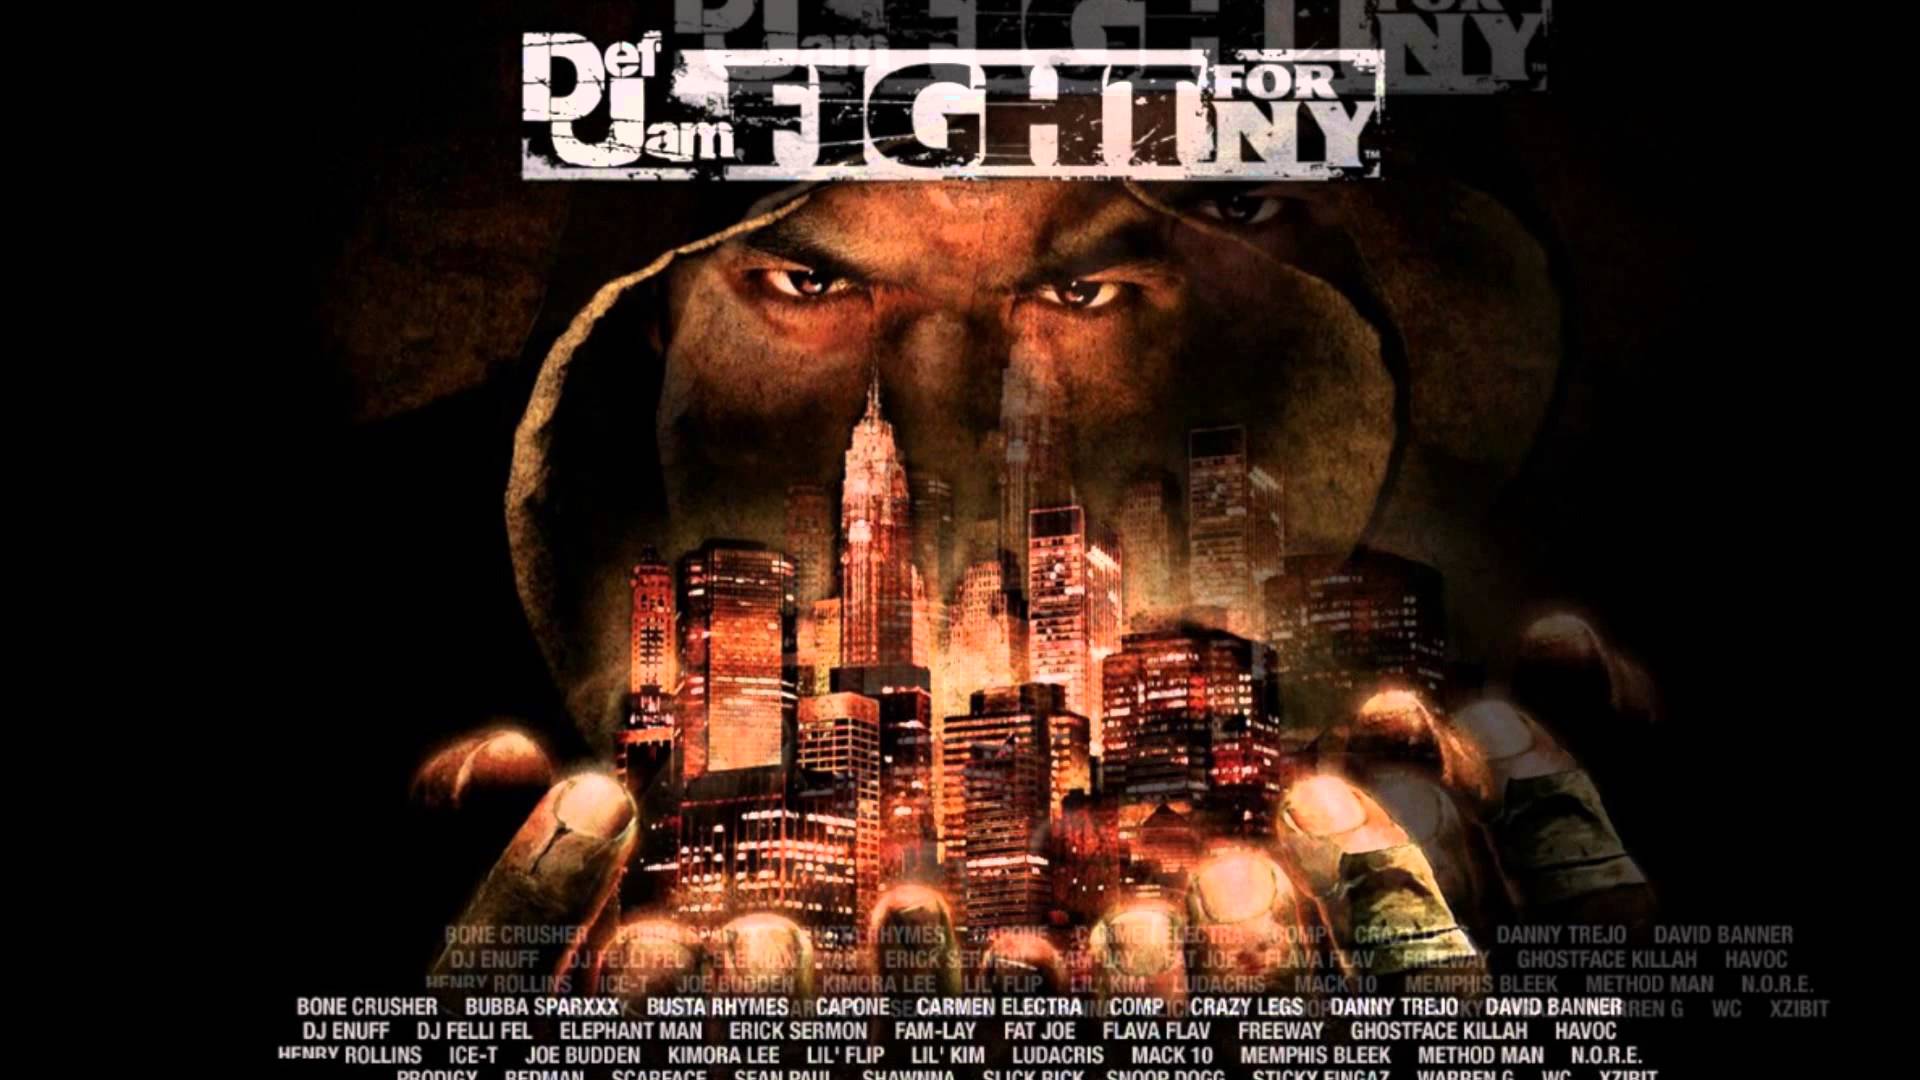 def jam fight for ny characters